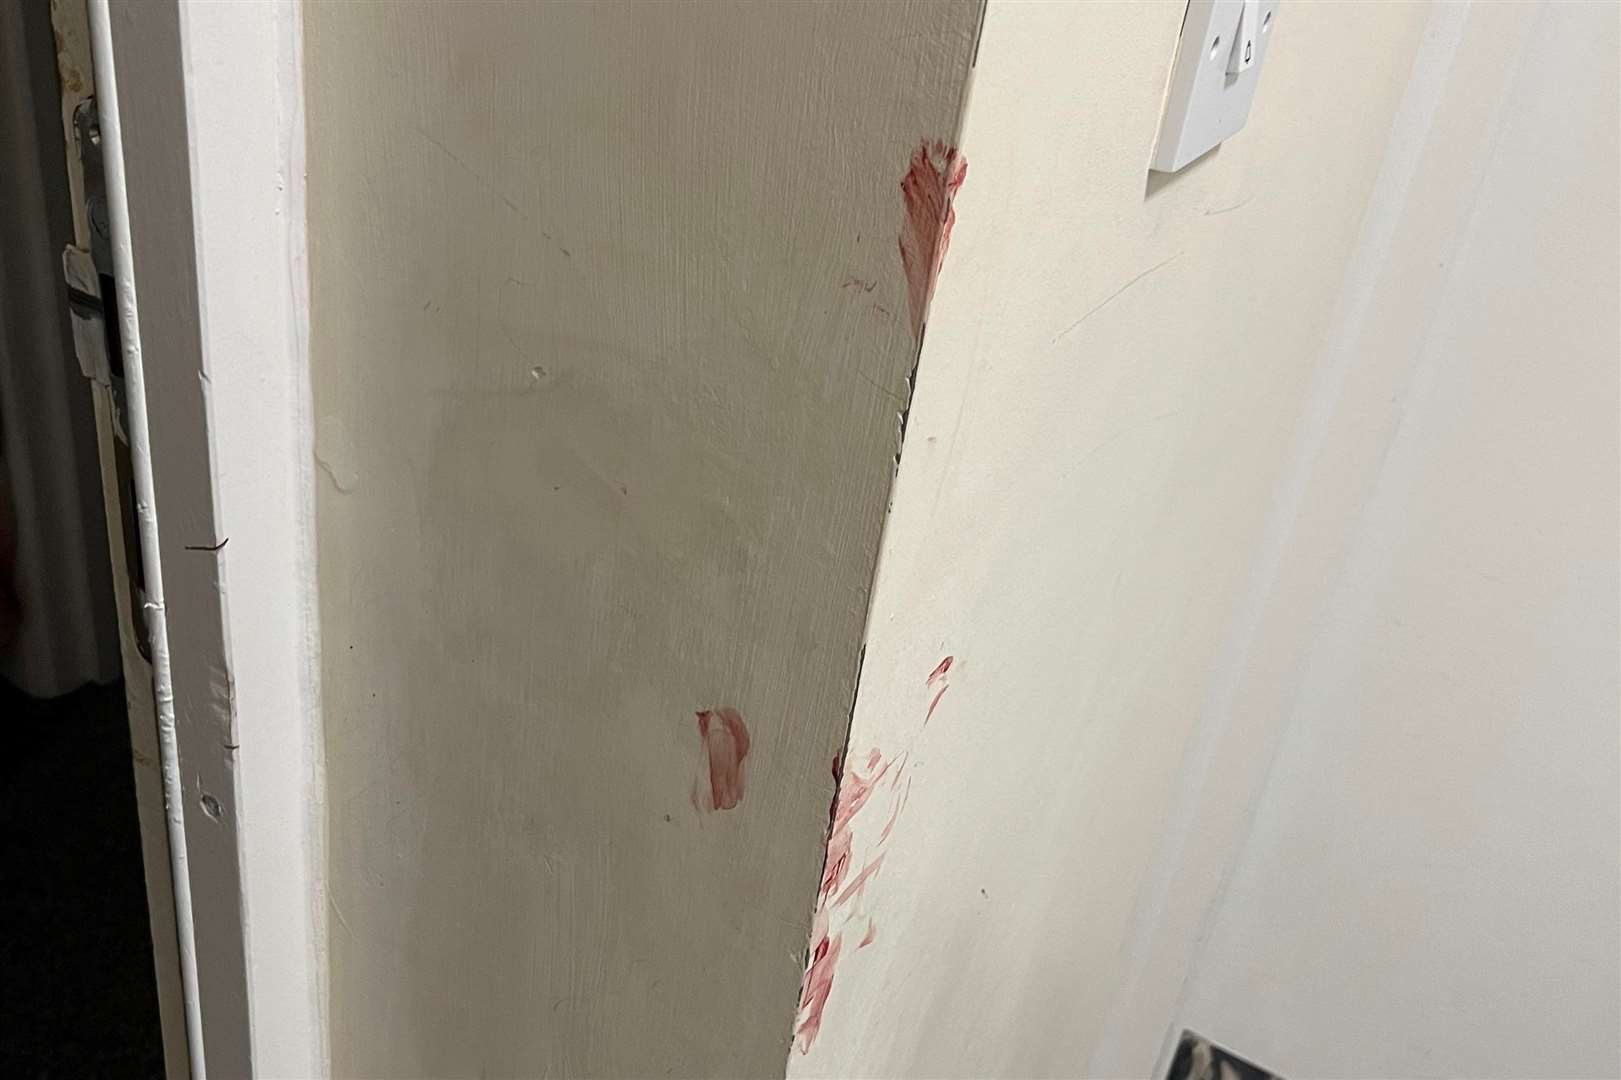 The blood-stained wall outside Rachael Jane's flat